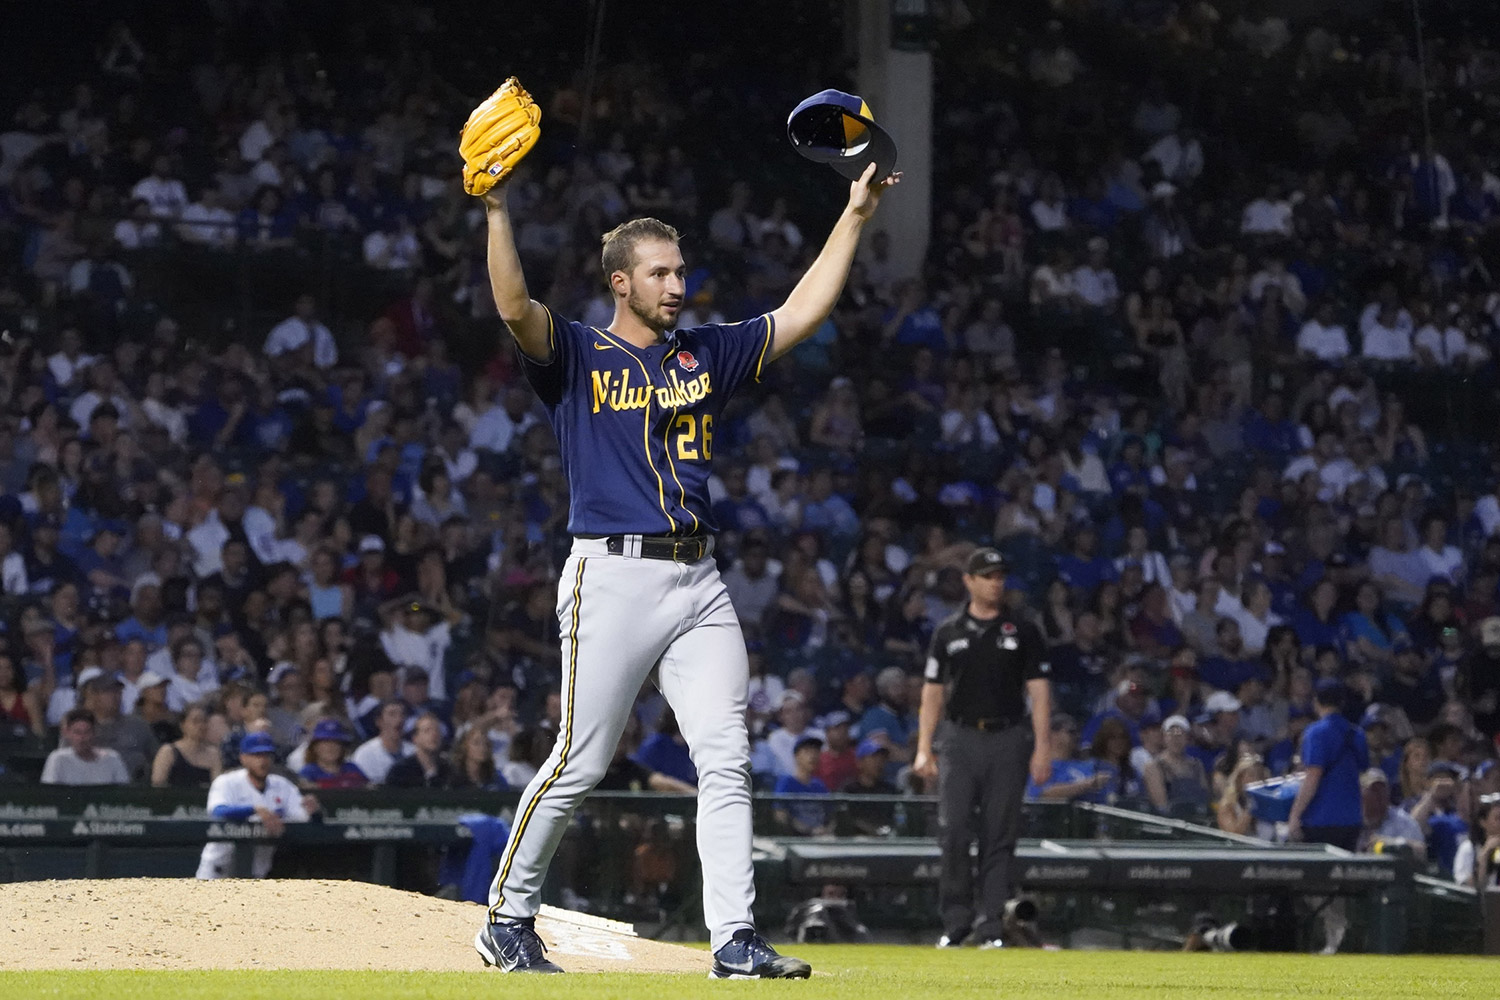 Aaron Ashby struggles; Brewers fall to Braves, 9-2